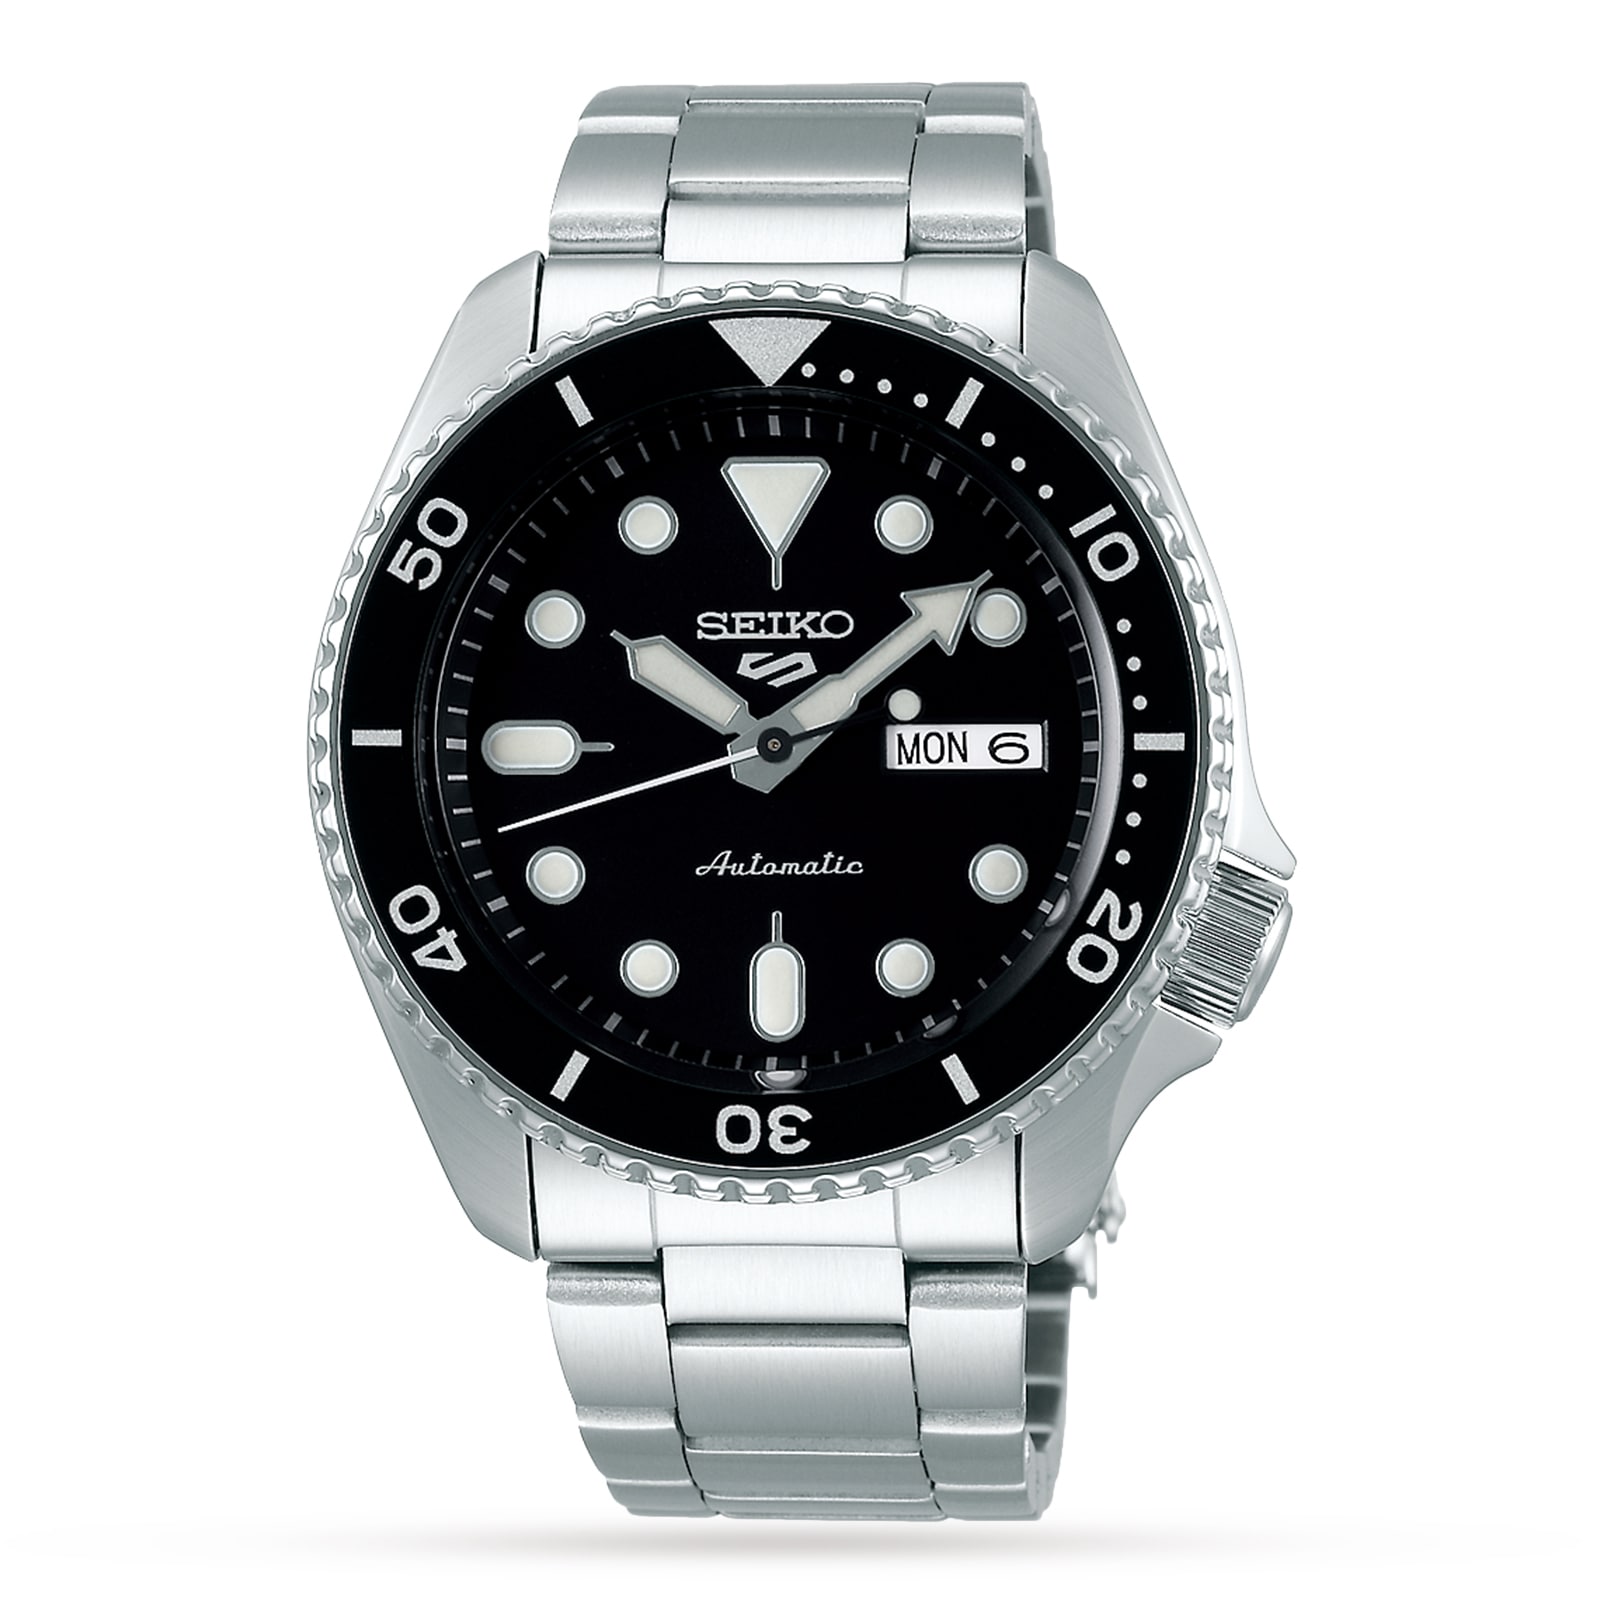 Seiko Watches, Seiko Automatic Prospex Divers Watch for Men for Sale UK |  Goldsmiths